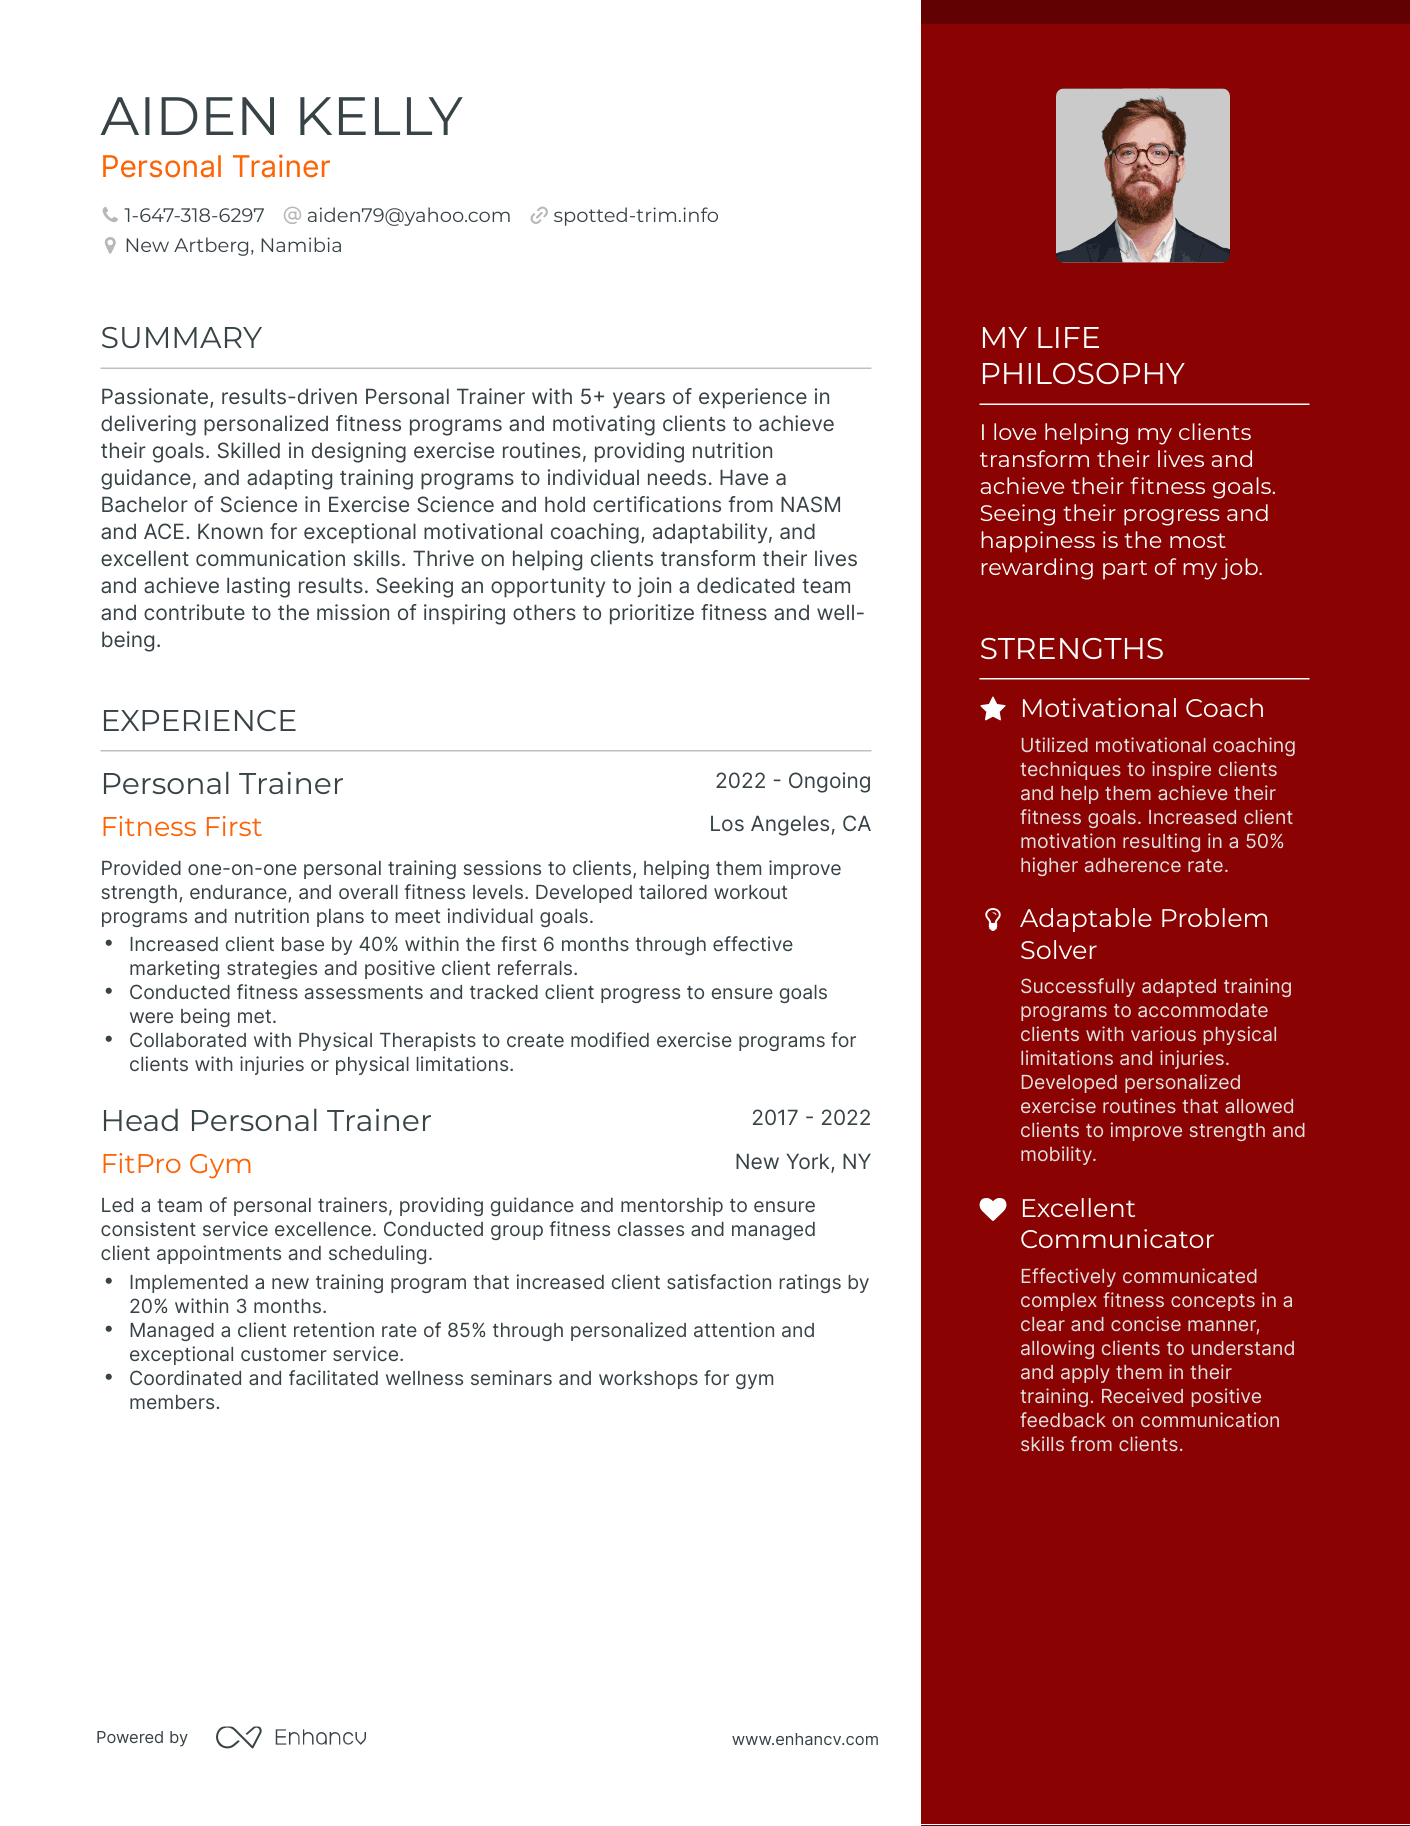 Personal Trainer resume example